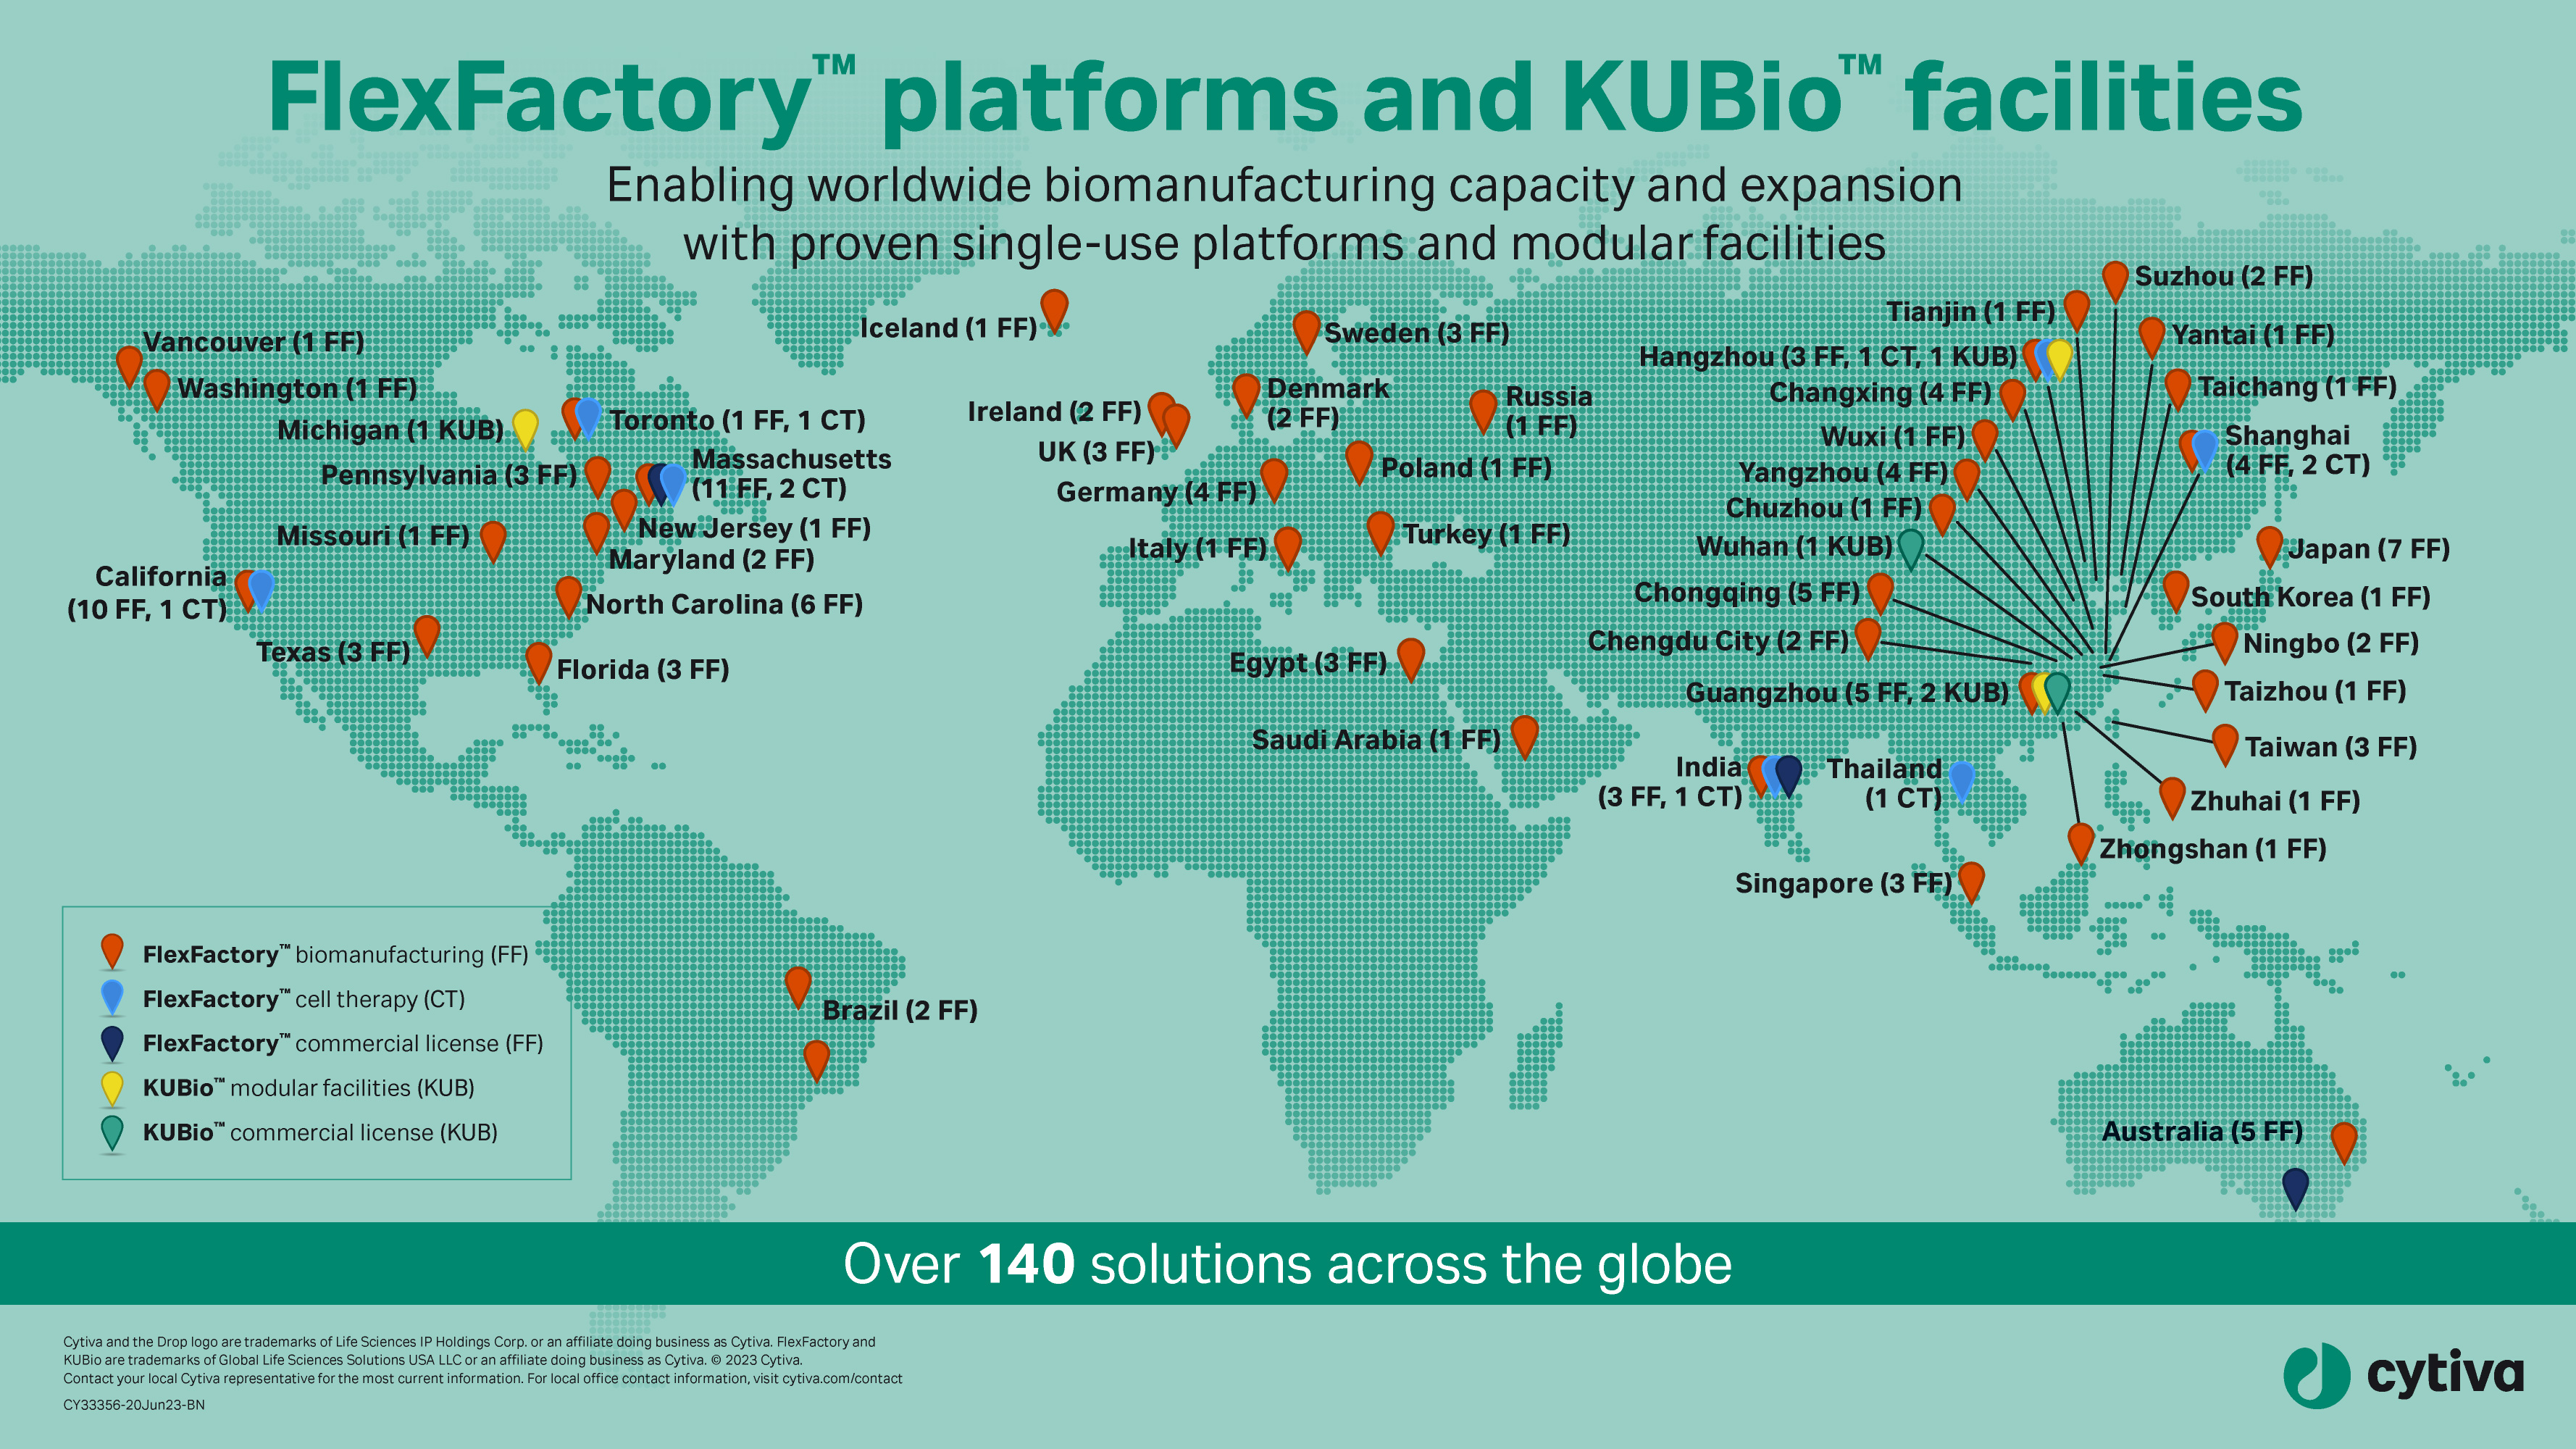 End-to-end, modular biopharma manufacturing capacity global locations